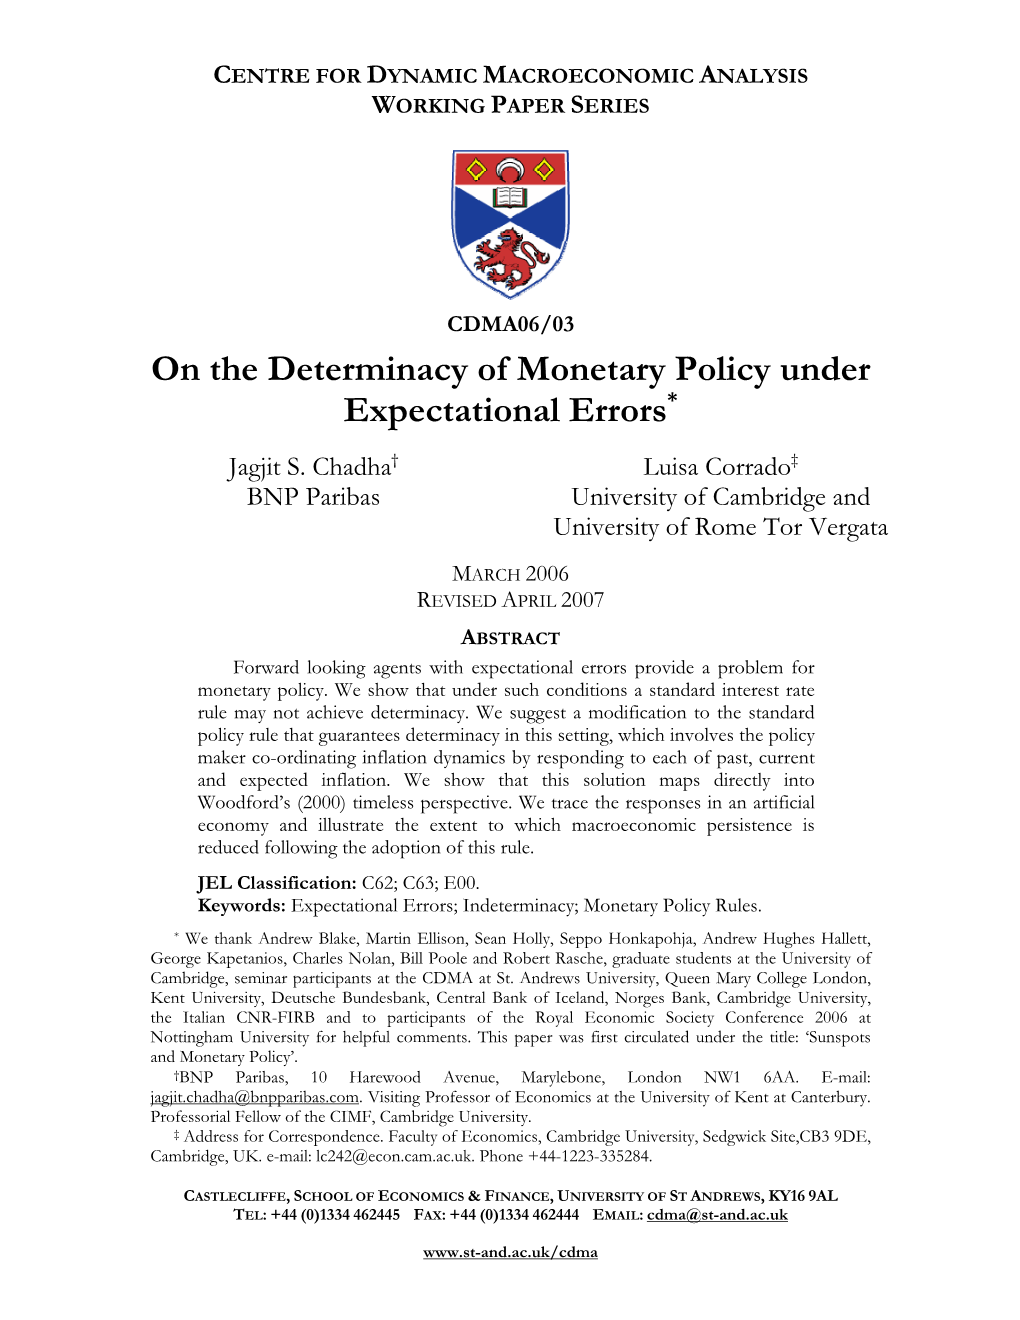 On the Determinacy of Monetary Policy Under Expectational Errors*